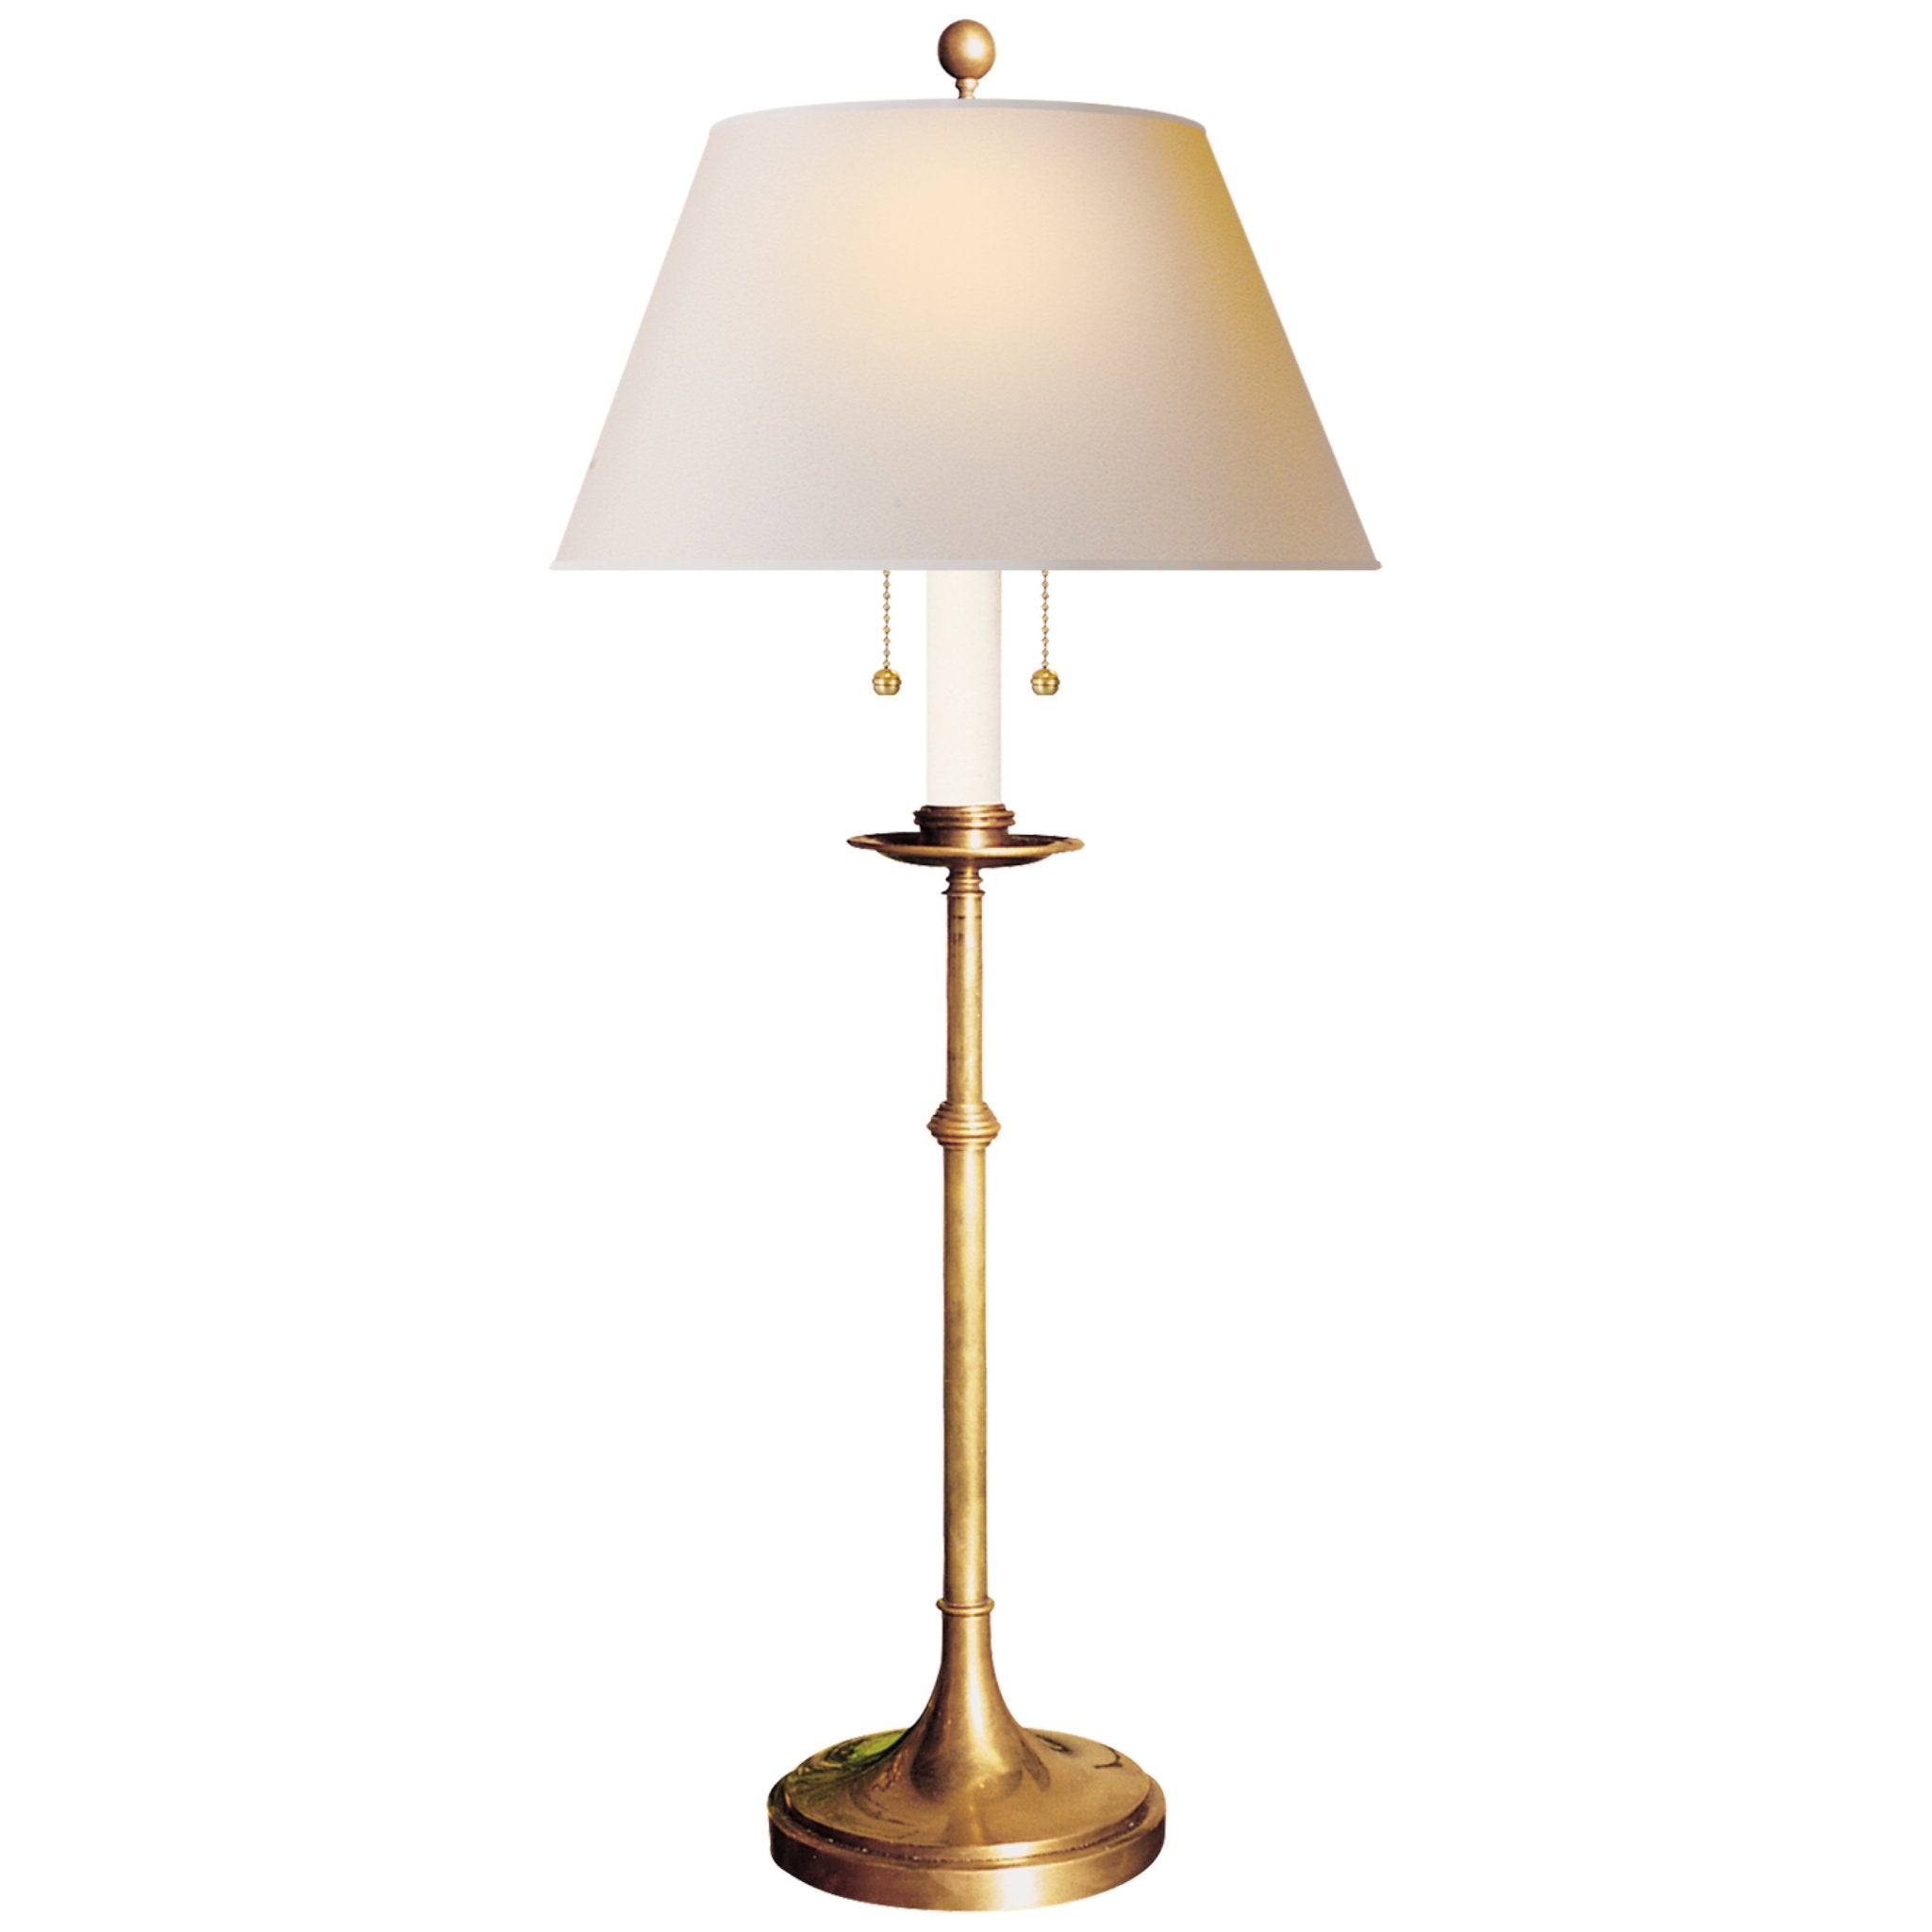 Chapman & Myers Dorchester Club Table Lamp in Antique-Burnished Brass with Natural Paper Shade